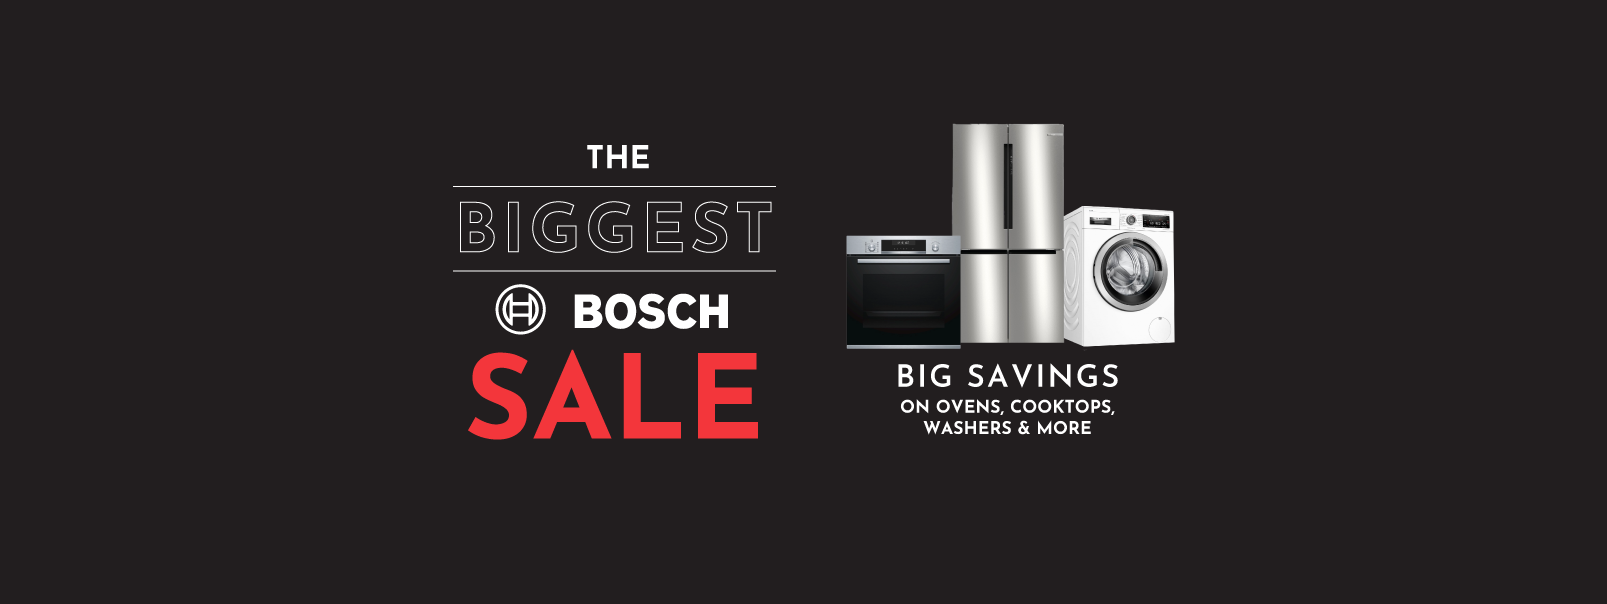 The Biggest Bosch Sale PLUS Receive A Bonus Visa e-Gift Card Up To $400!* at Hart & Co